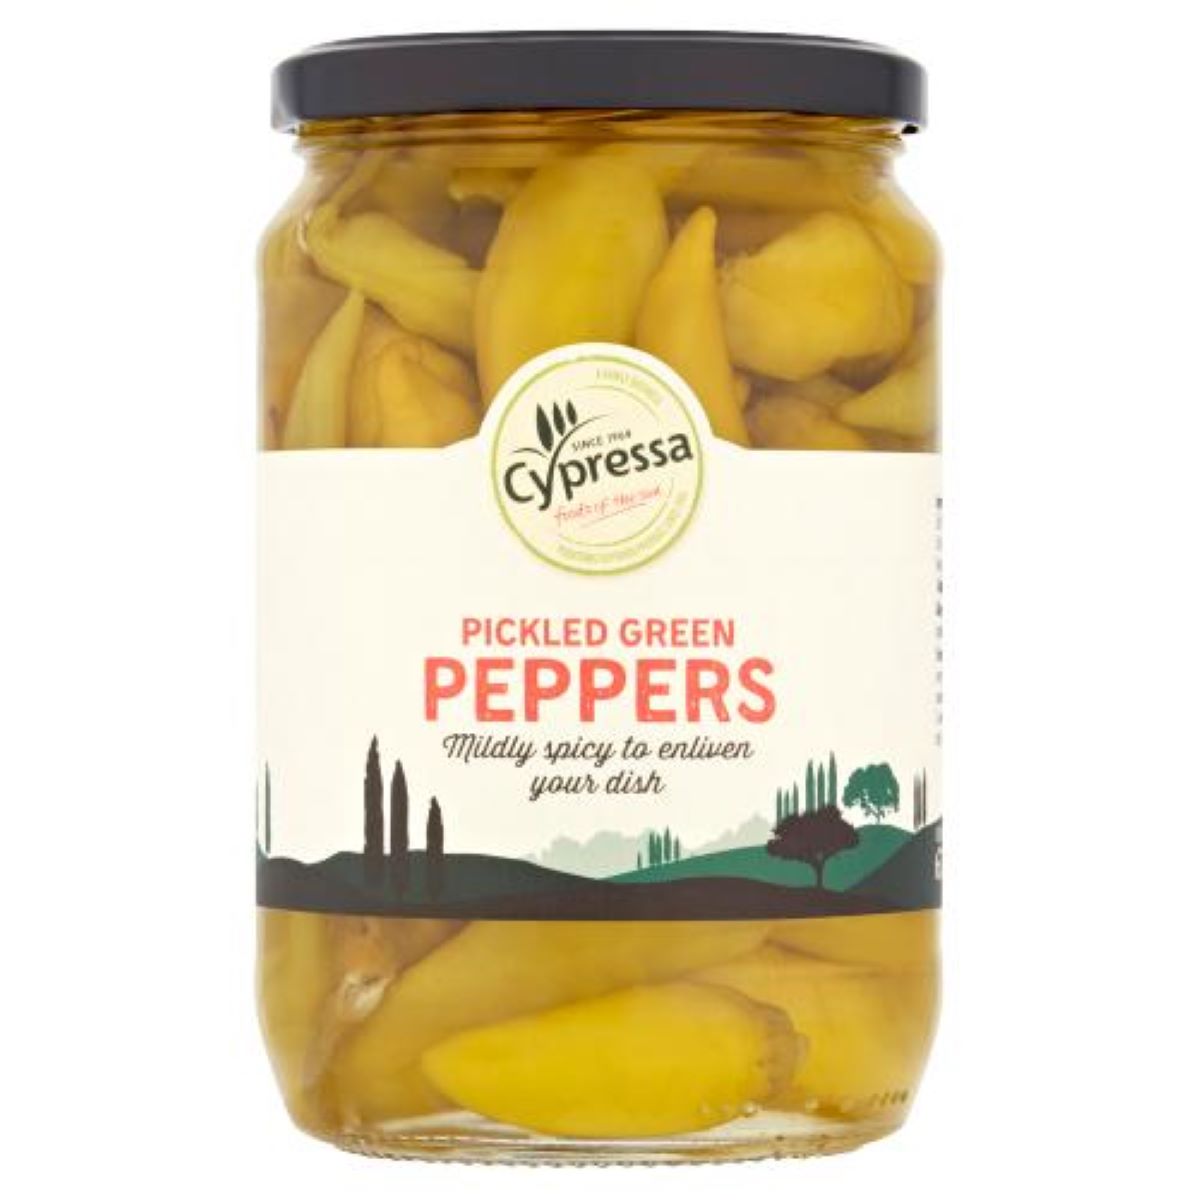 Cypressa Pickled Green Peppers 670g